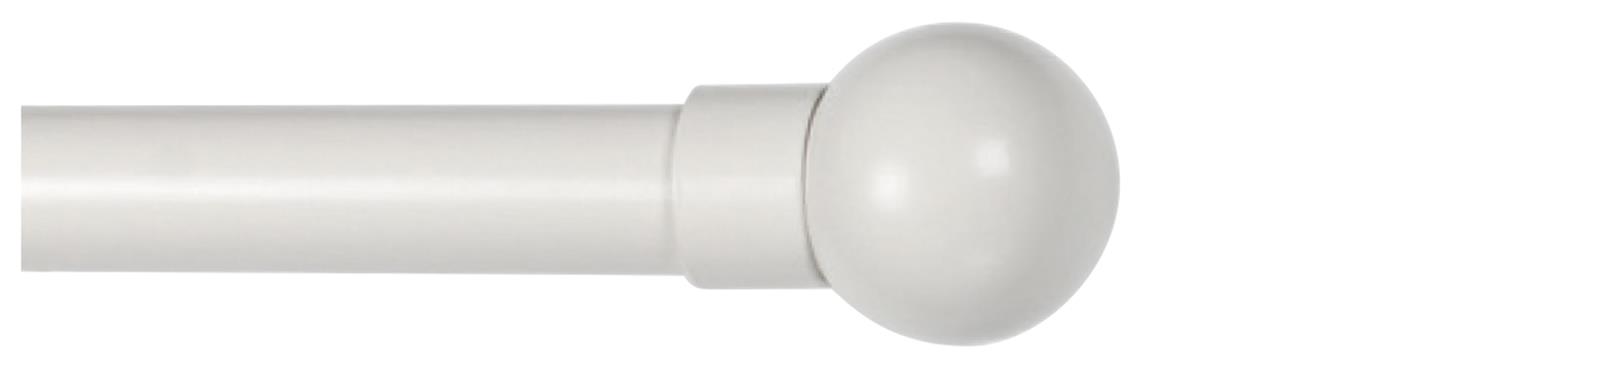 Cameron Fuller 32mm Metal Curtain Pole Oyster Ball